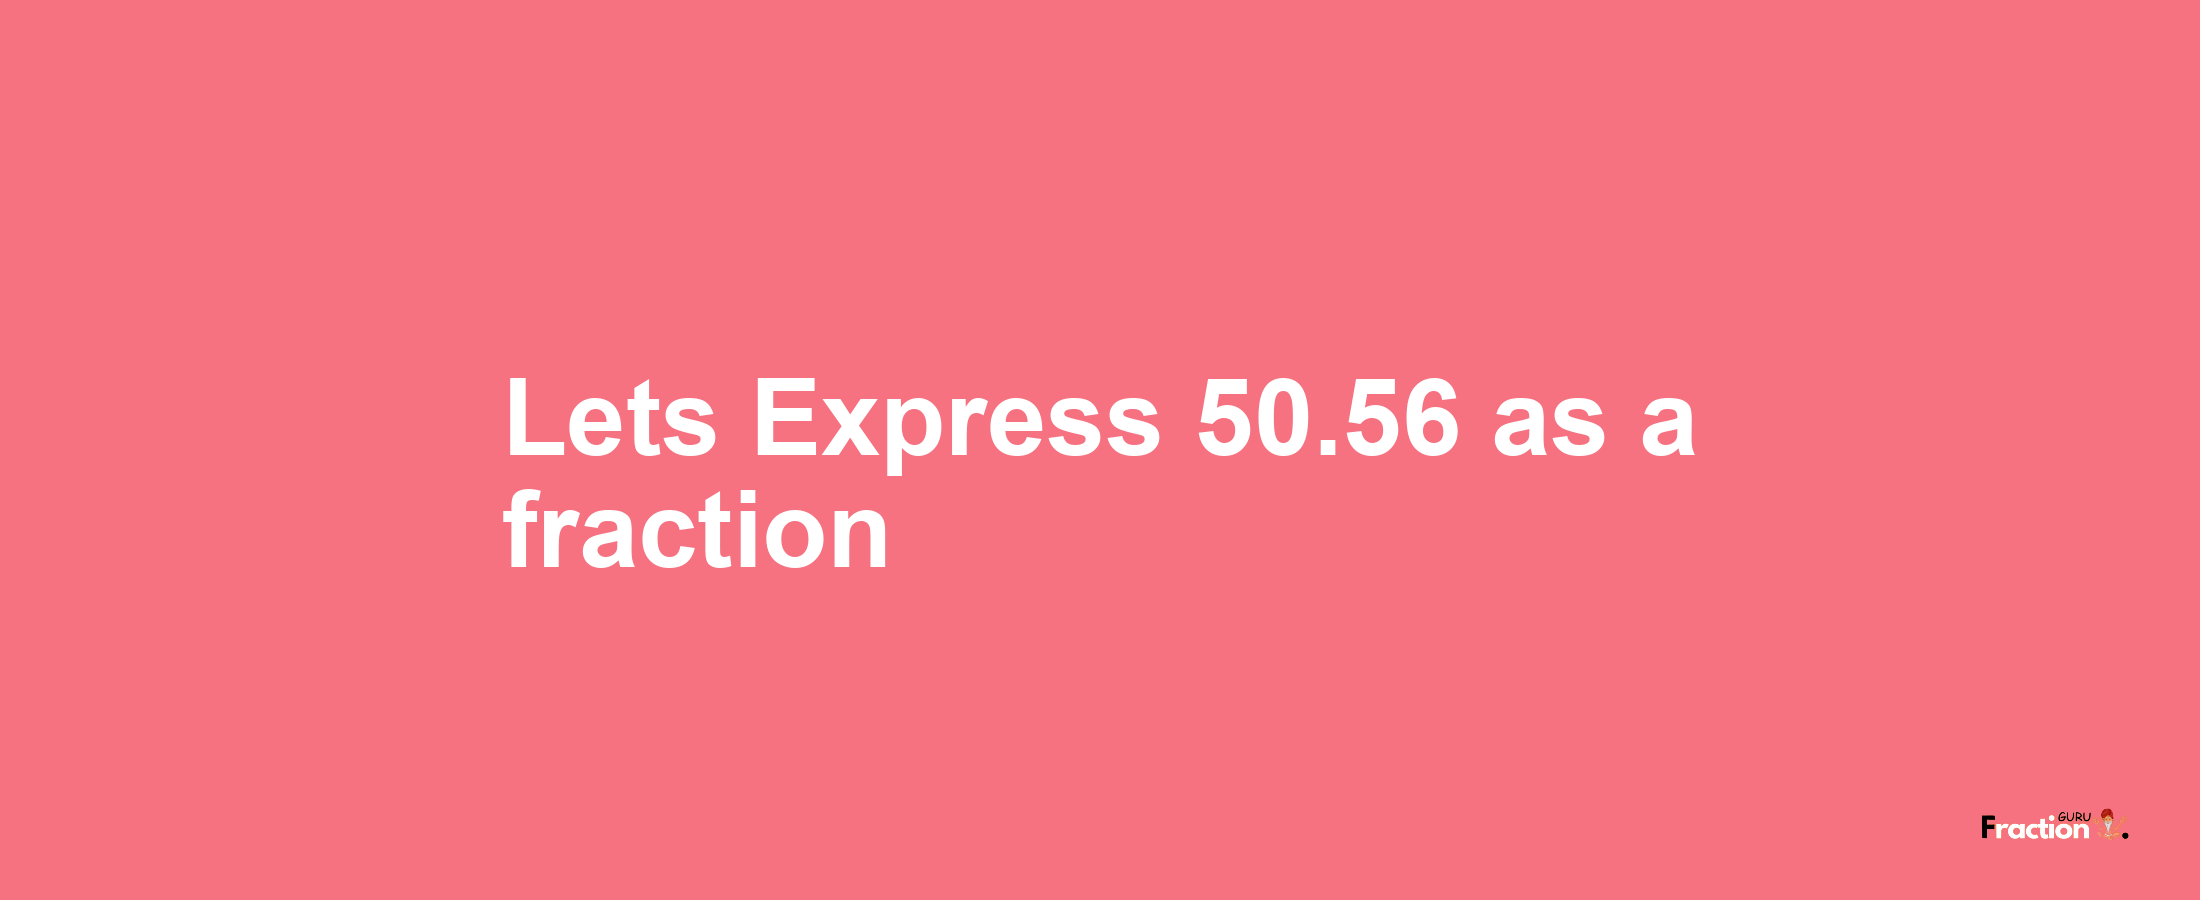 Lets Express 50.56 as afraction